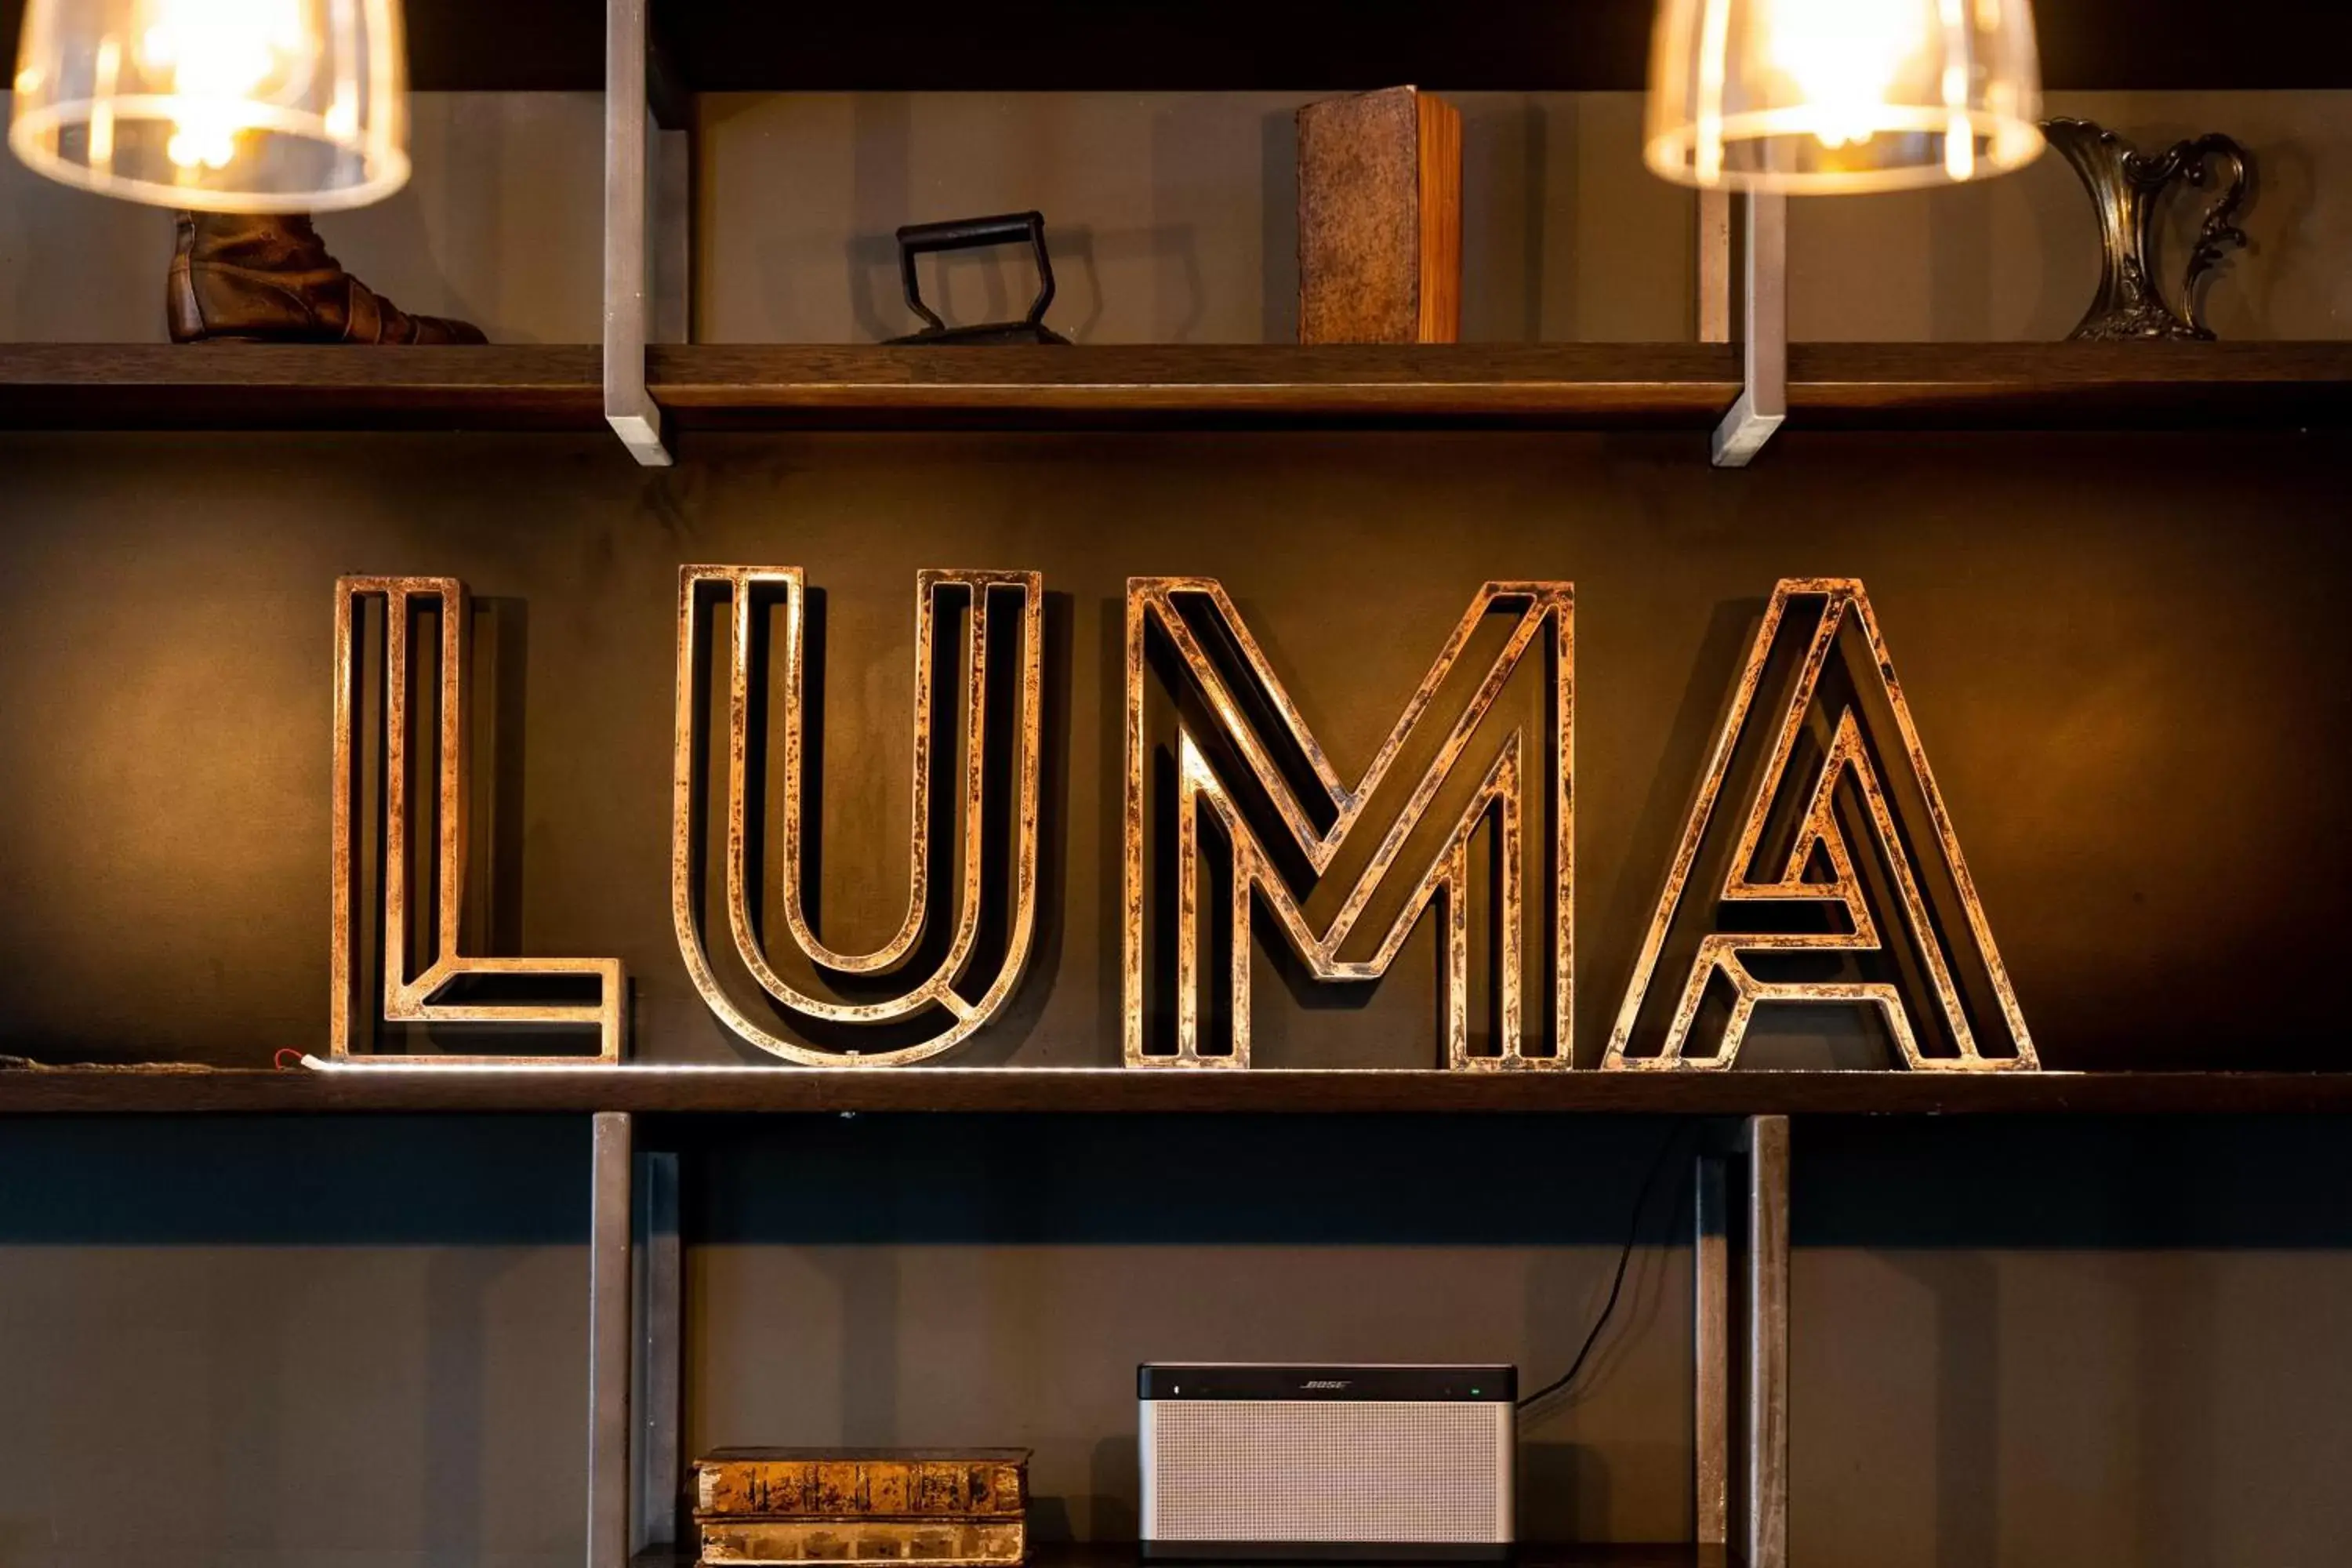 Property logo or sign in Heeton Concept Hotel – Luma Hammersmith